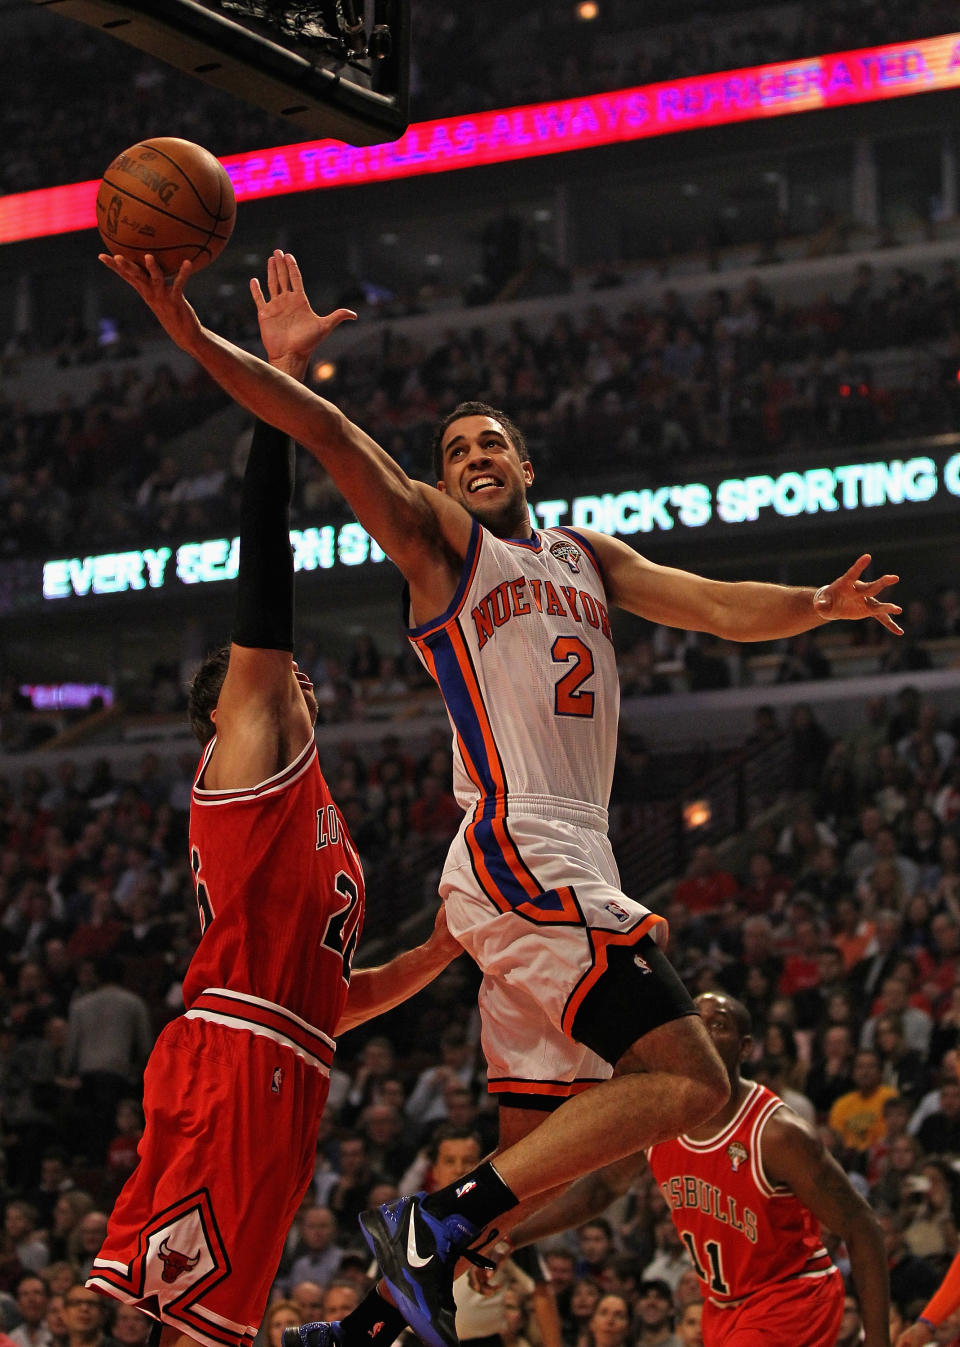 CHICAGO, IL - MARCH 12: Landry Fields #2 of the New York Knicks shoots over Kyle Korver #26 of the Chicago Bulls at the United Center on March 12, 2012 in Chicago, Illinois. NOTE TO USER: User expressly acknowledges and agrees that, by downloading and or using this photograph, User is consenting to the terms and conditions of the Getty Images License Agreement. (Photo by Jonathan Daniel/Getty Images)